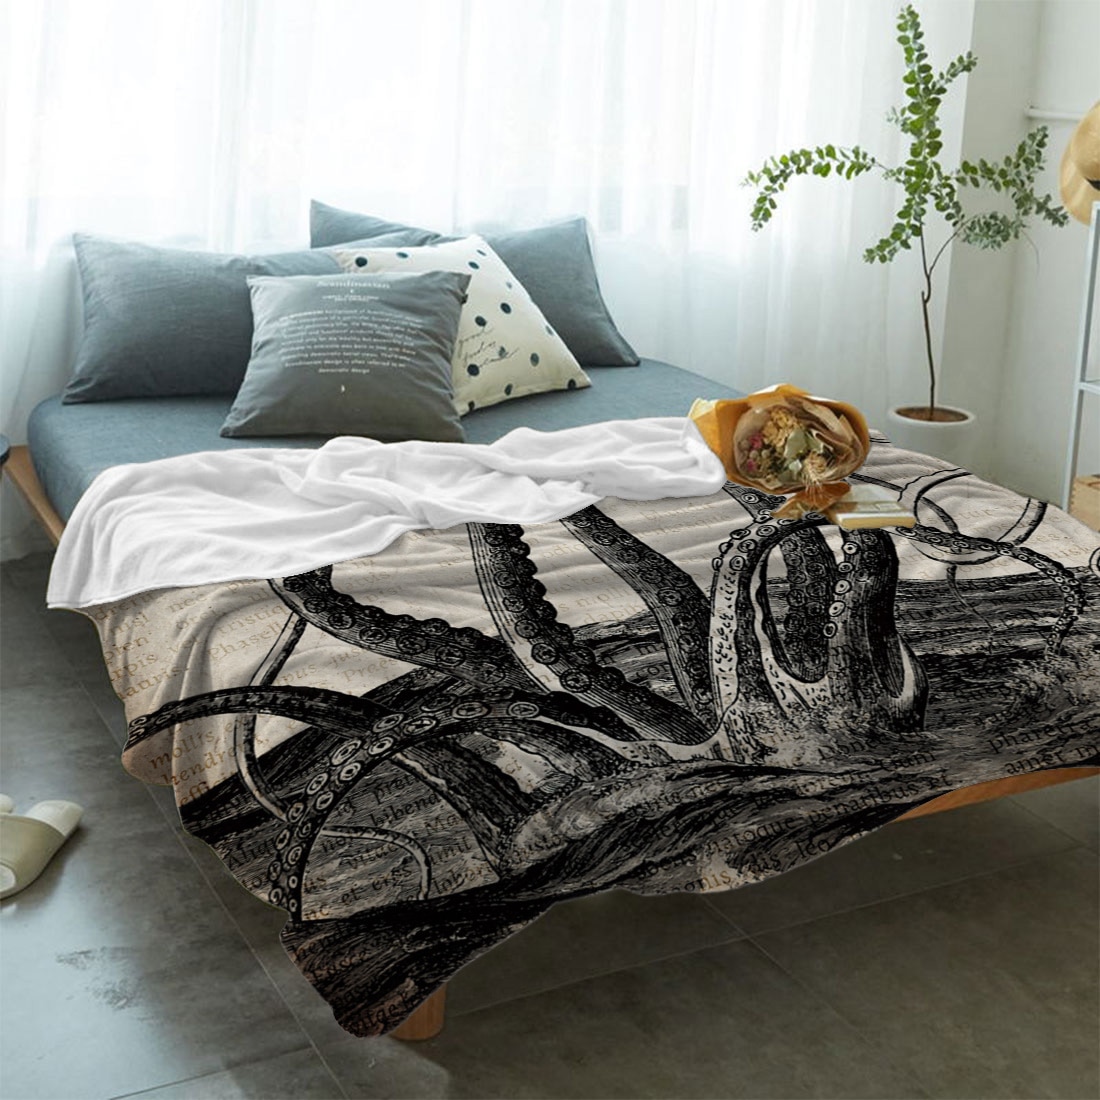 Cthulhu Octopus Old Newspaper Flannel Blanket for Bed Sofa Portable Soft Fleece Throw Funny Plush Bedspreads 1